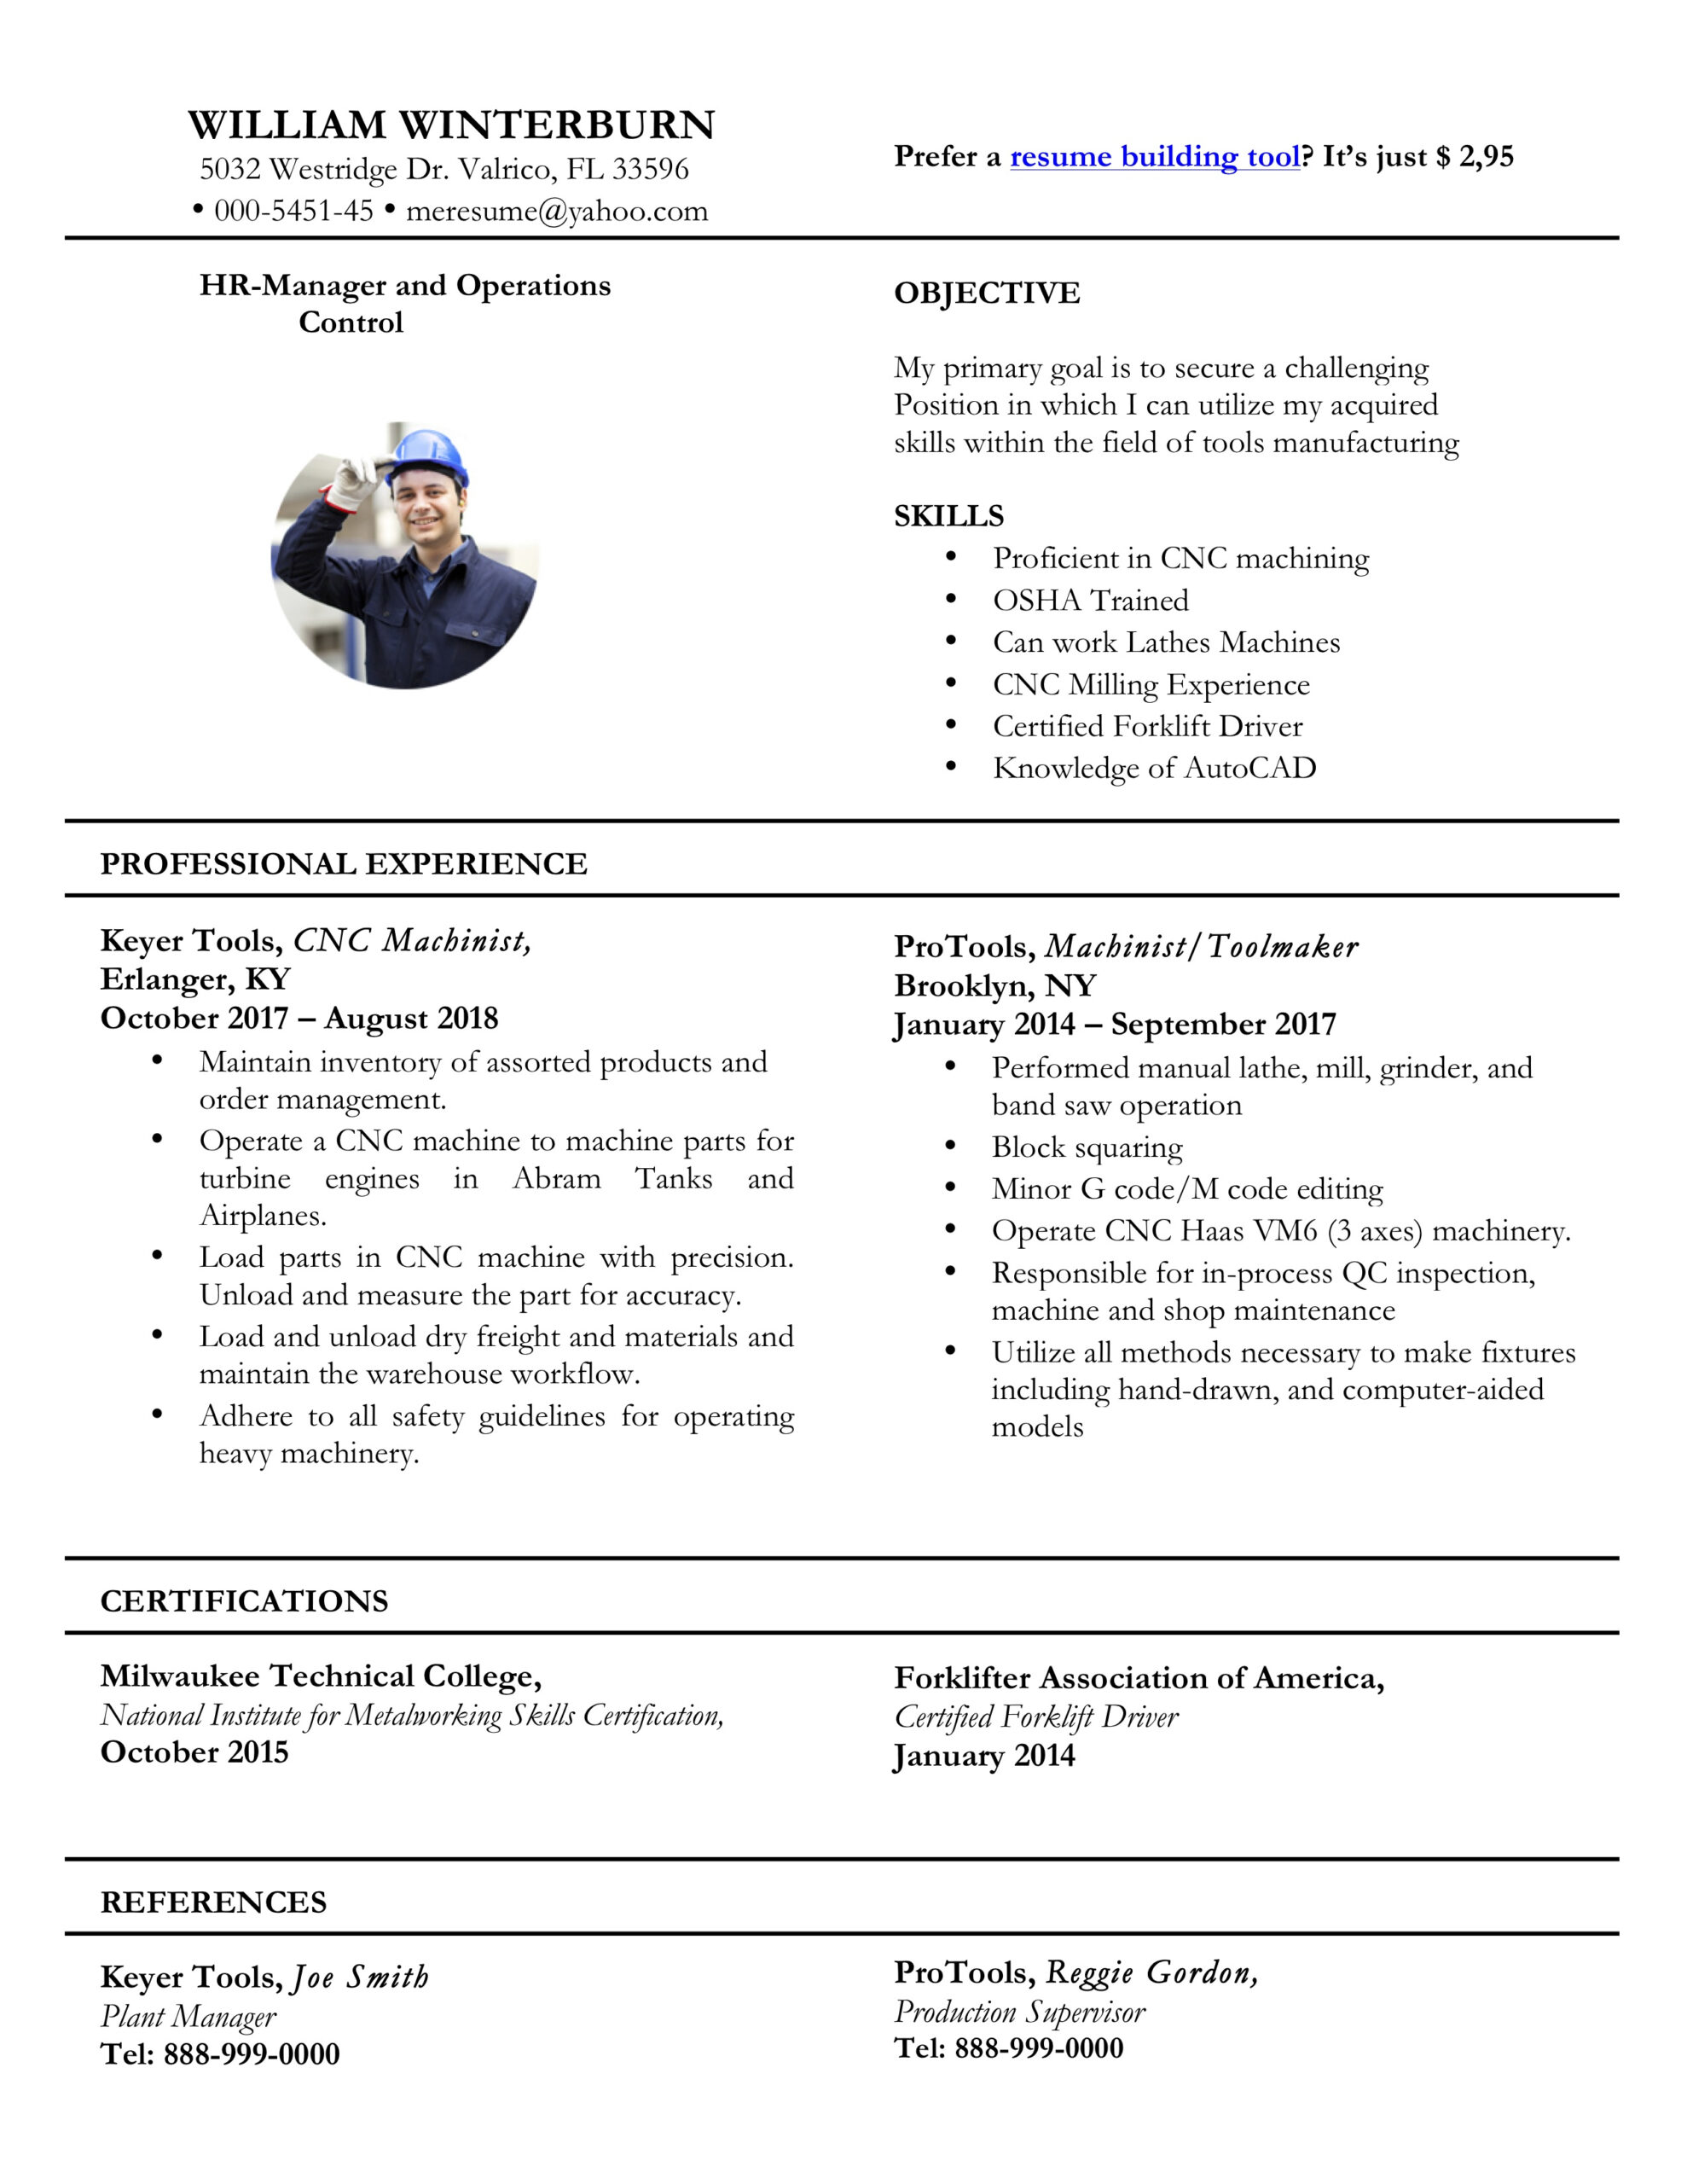 Resume Templates [2020] | Pdf And Word | Free Downloads + For Microsoft Word Resumes Templates